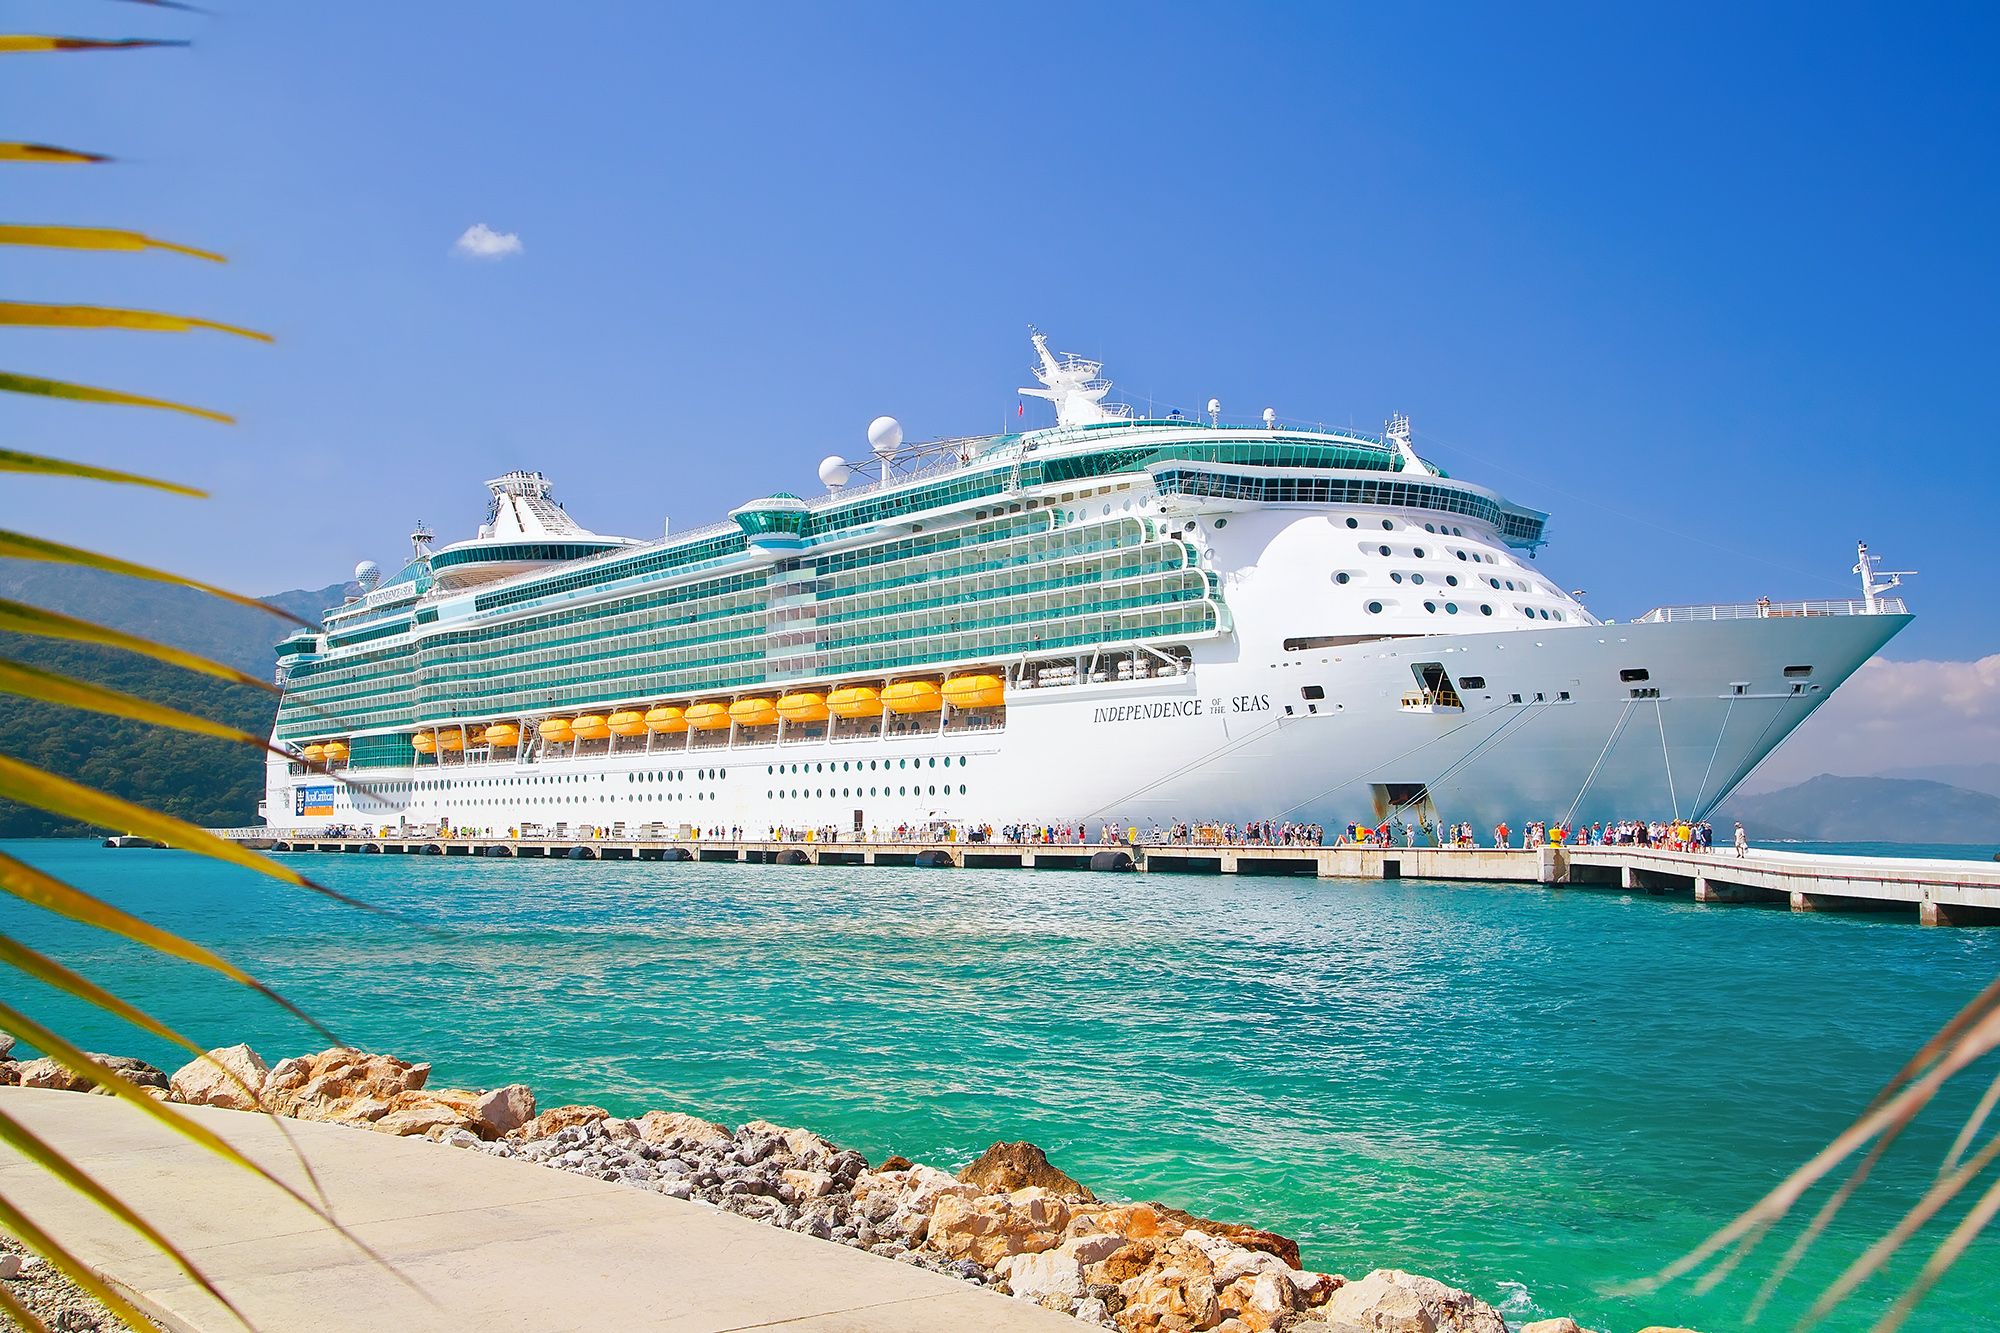 Royal Caribbean Offering Lowest Airfares to Their Caribbean and Bermuda